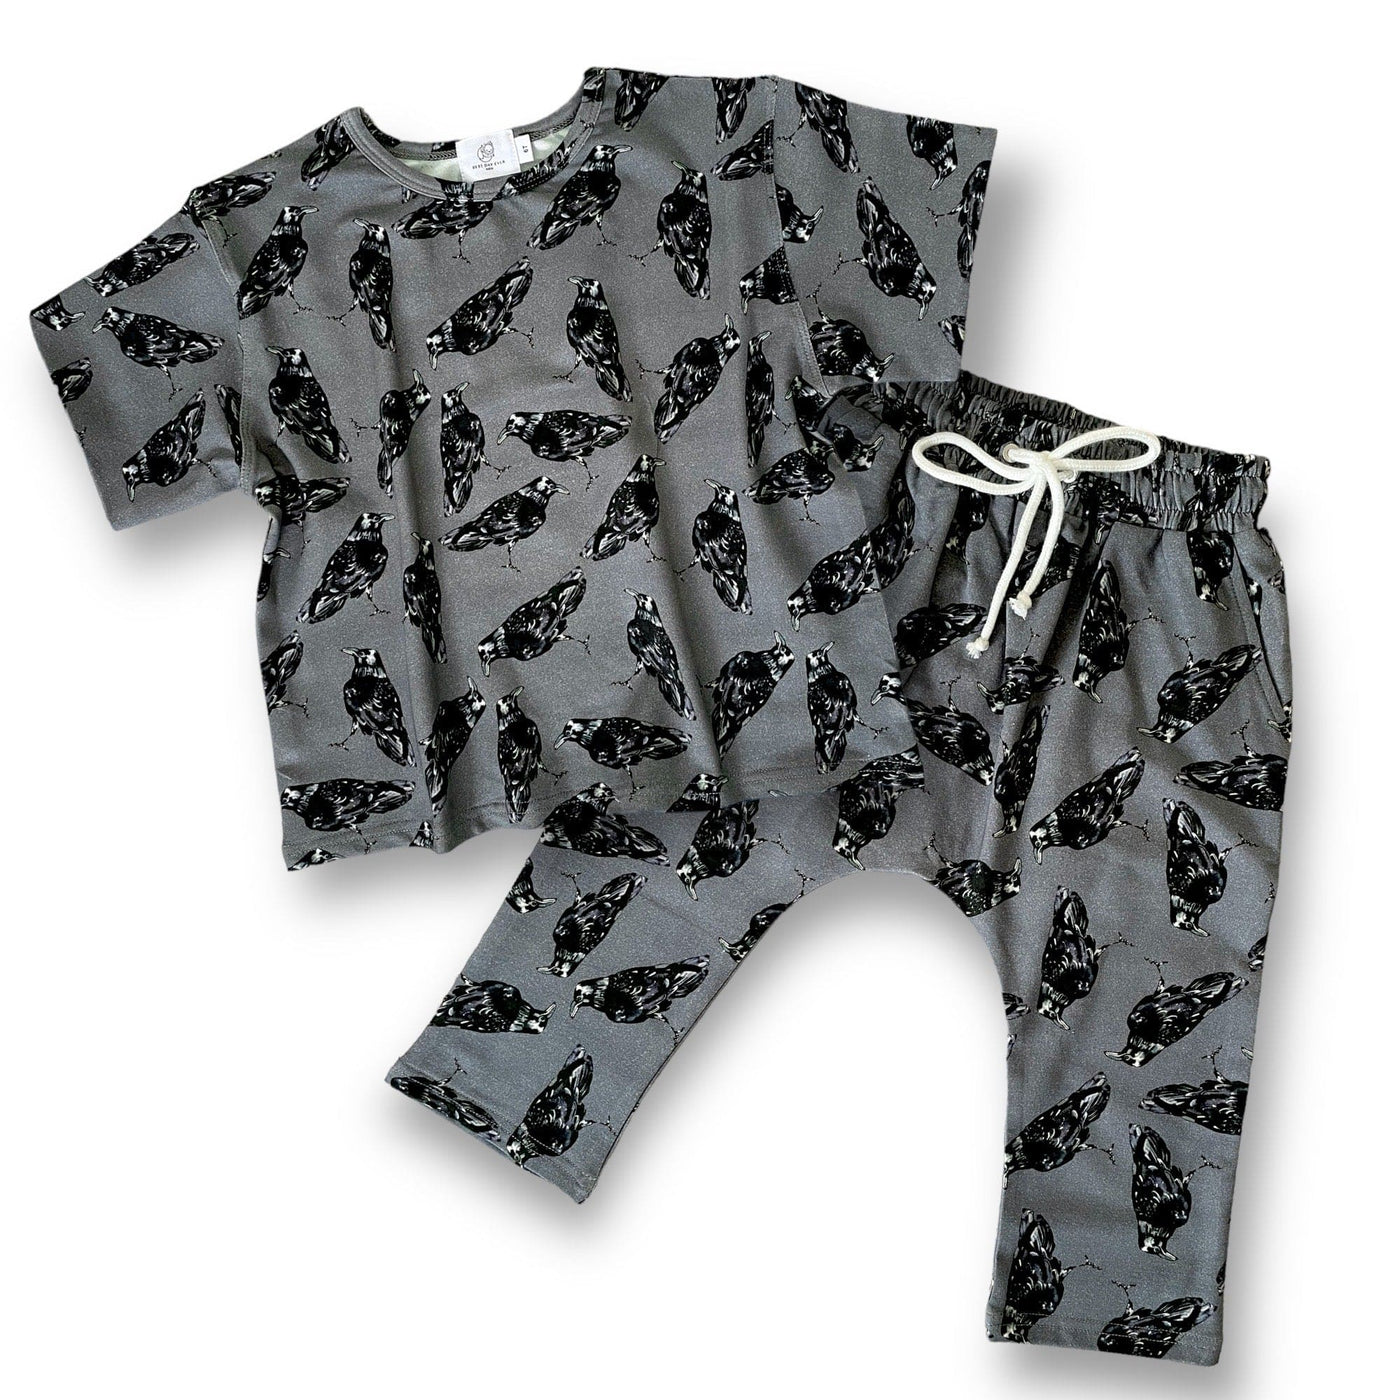 Best Day Ever Kids Baby & Toddler Outfits 6-12m / The Raven BDE Signature Cropped Sweat Set - The Raven buy online boutique kids clothing